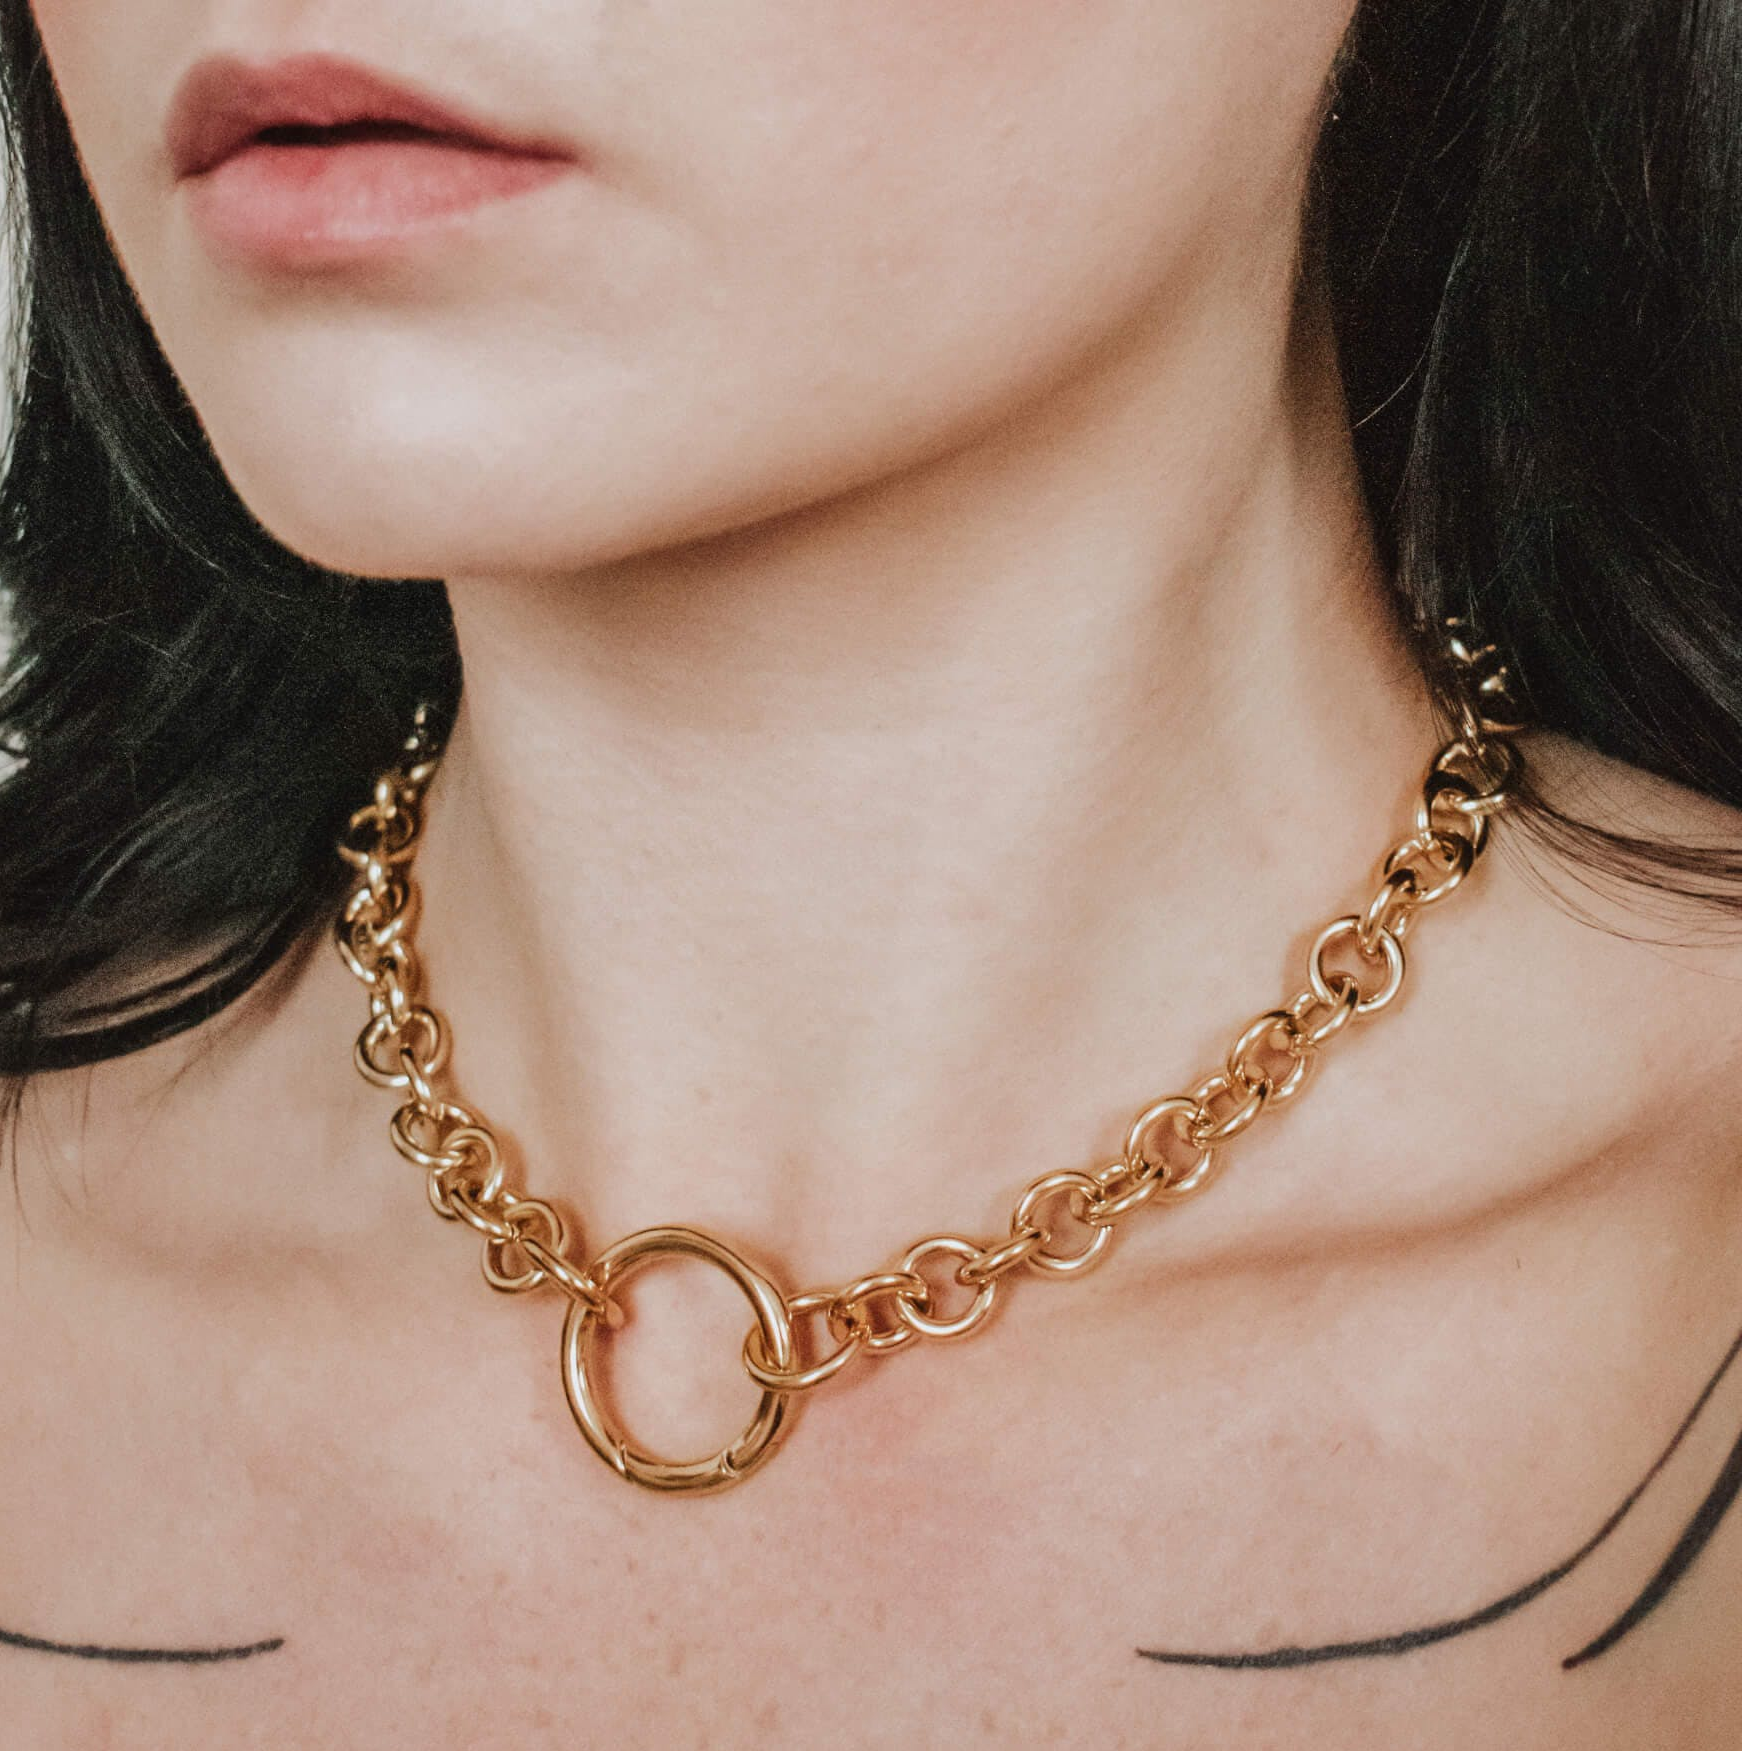 Model wearing gold chain necklace